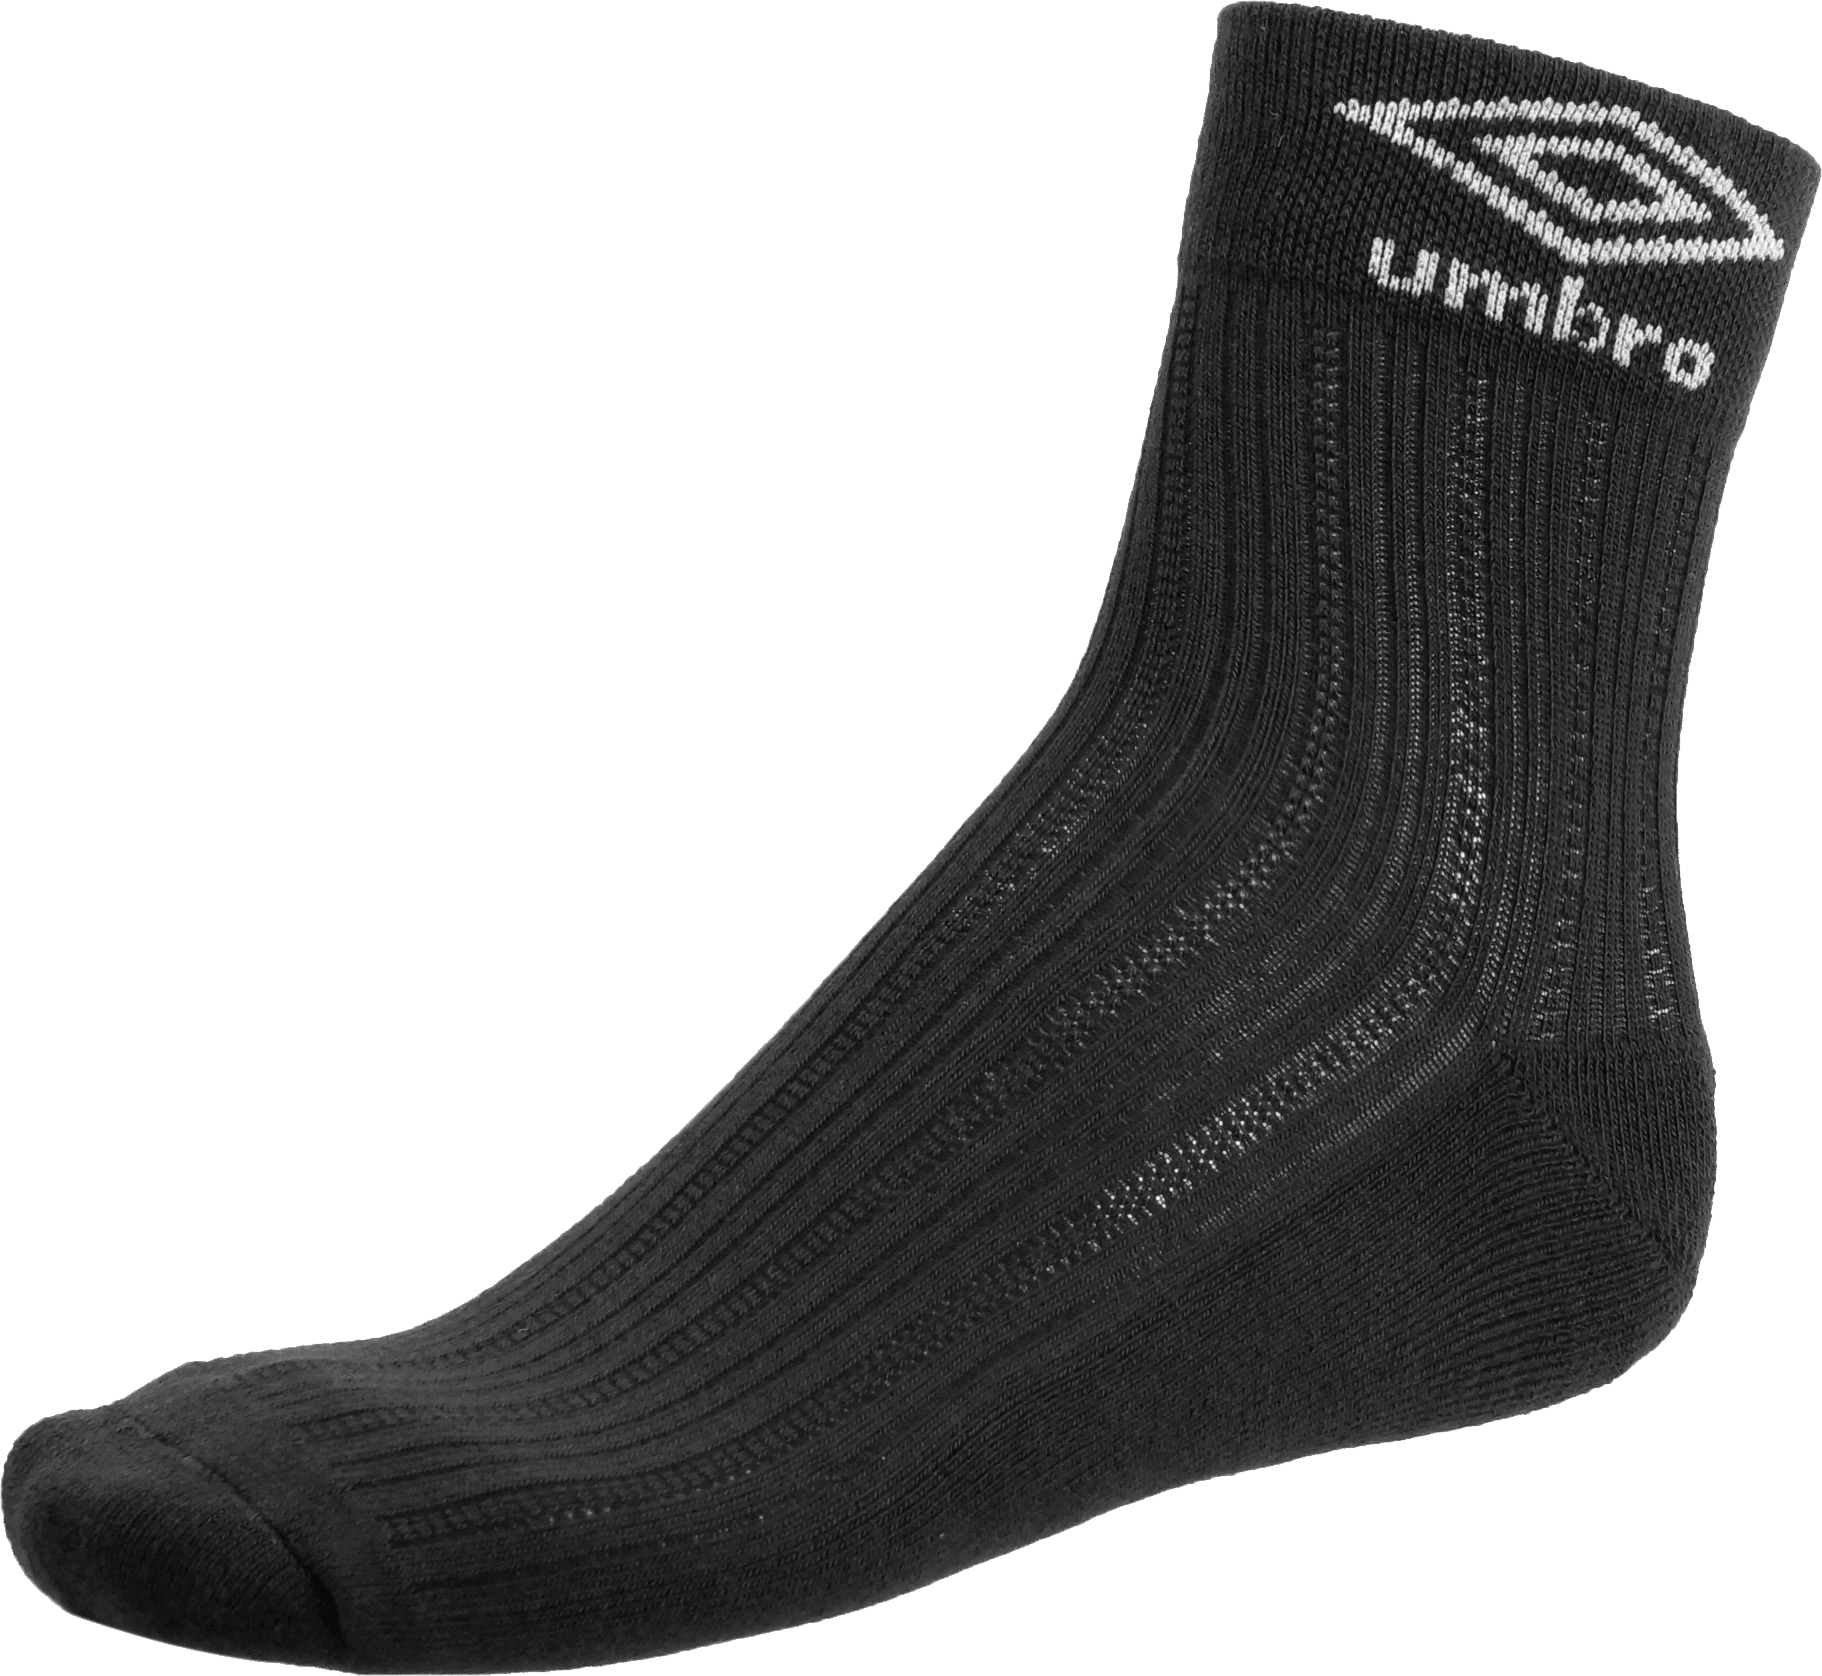 Download A Black Sock With White Logo [100% Free] - FastPNG